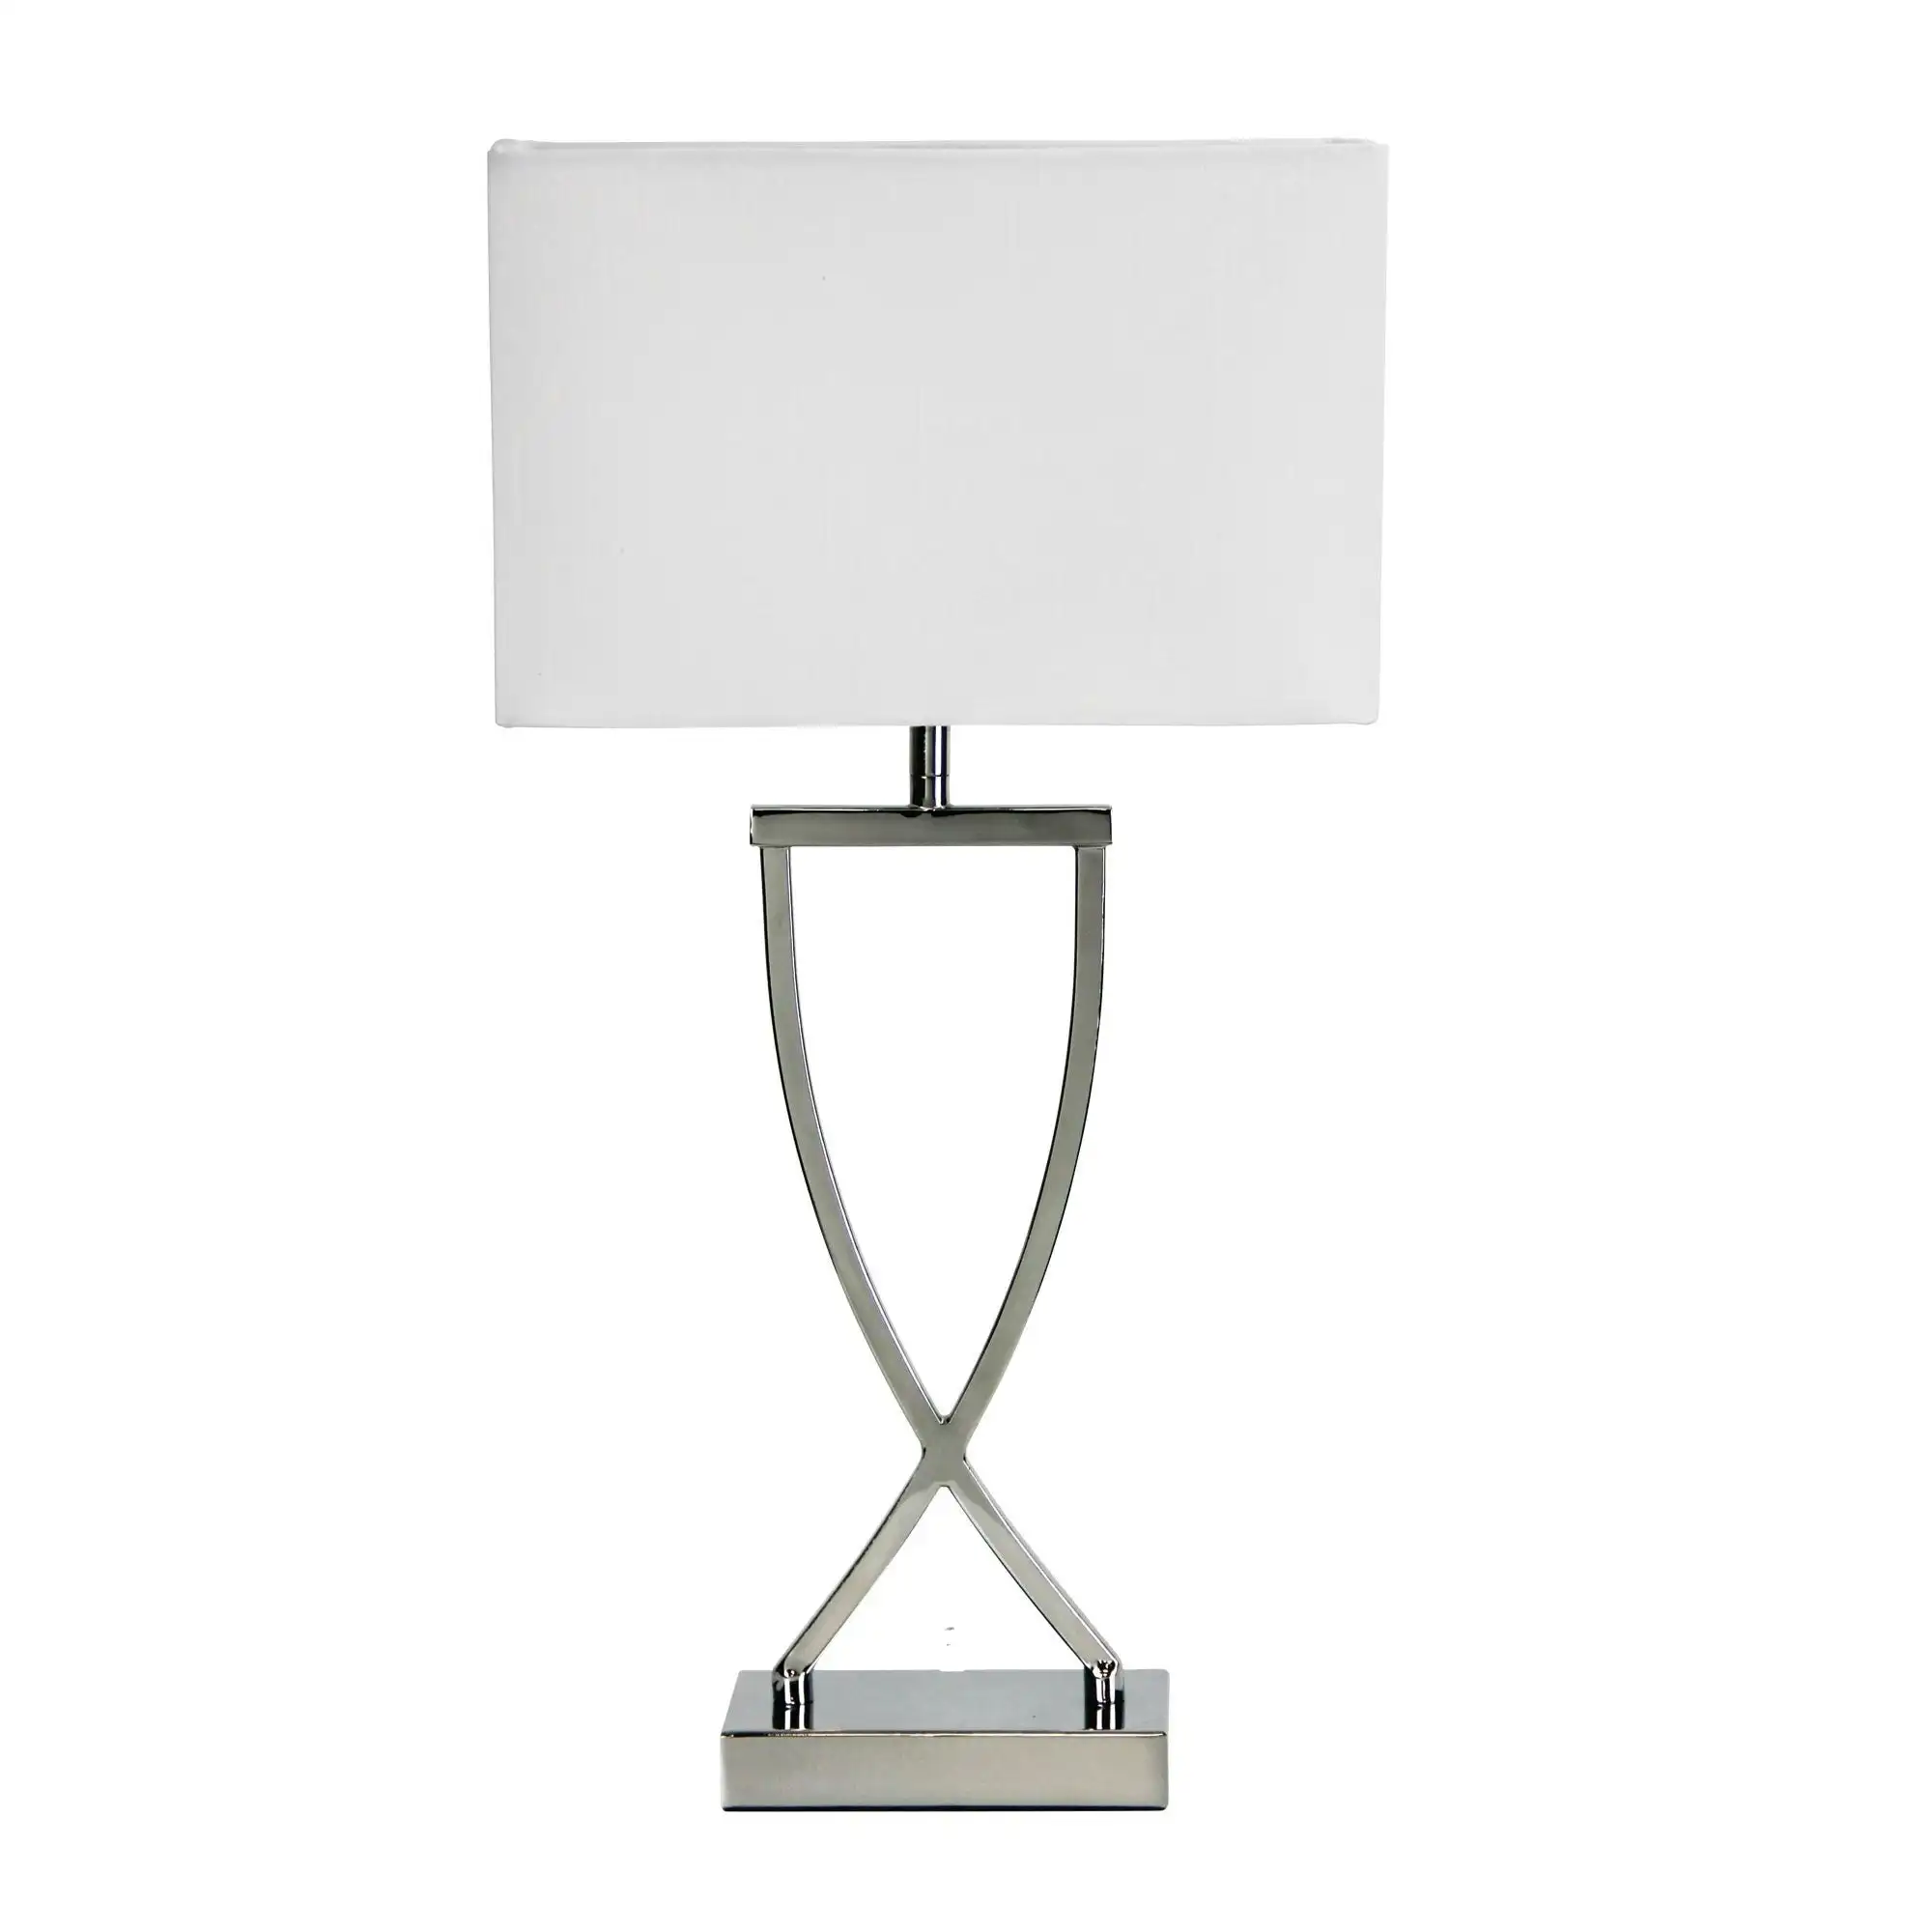 CHI Chrome Complete Bedside Lamp